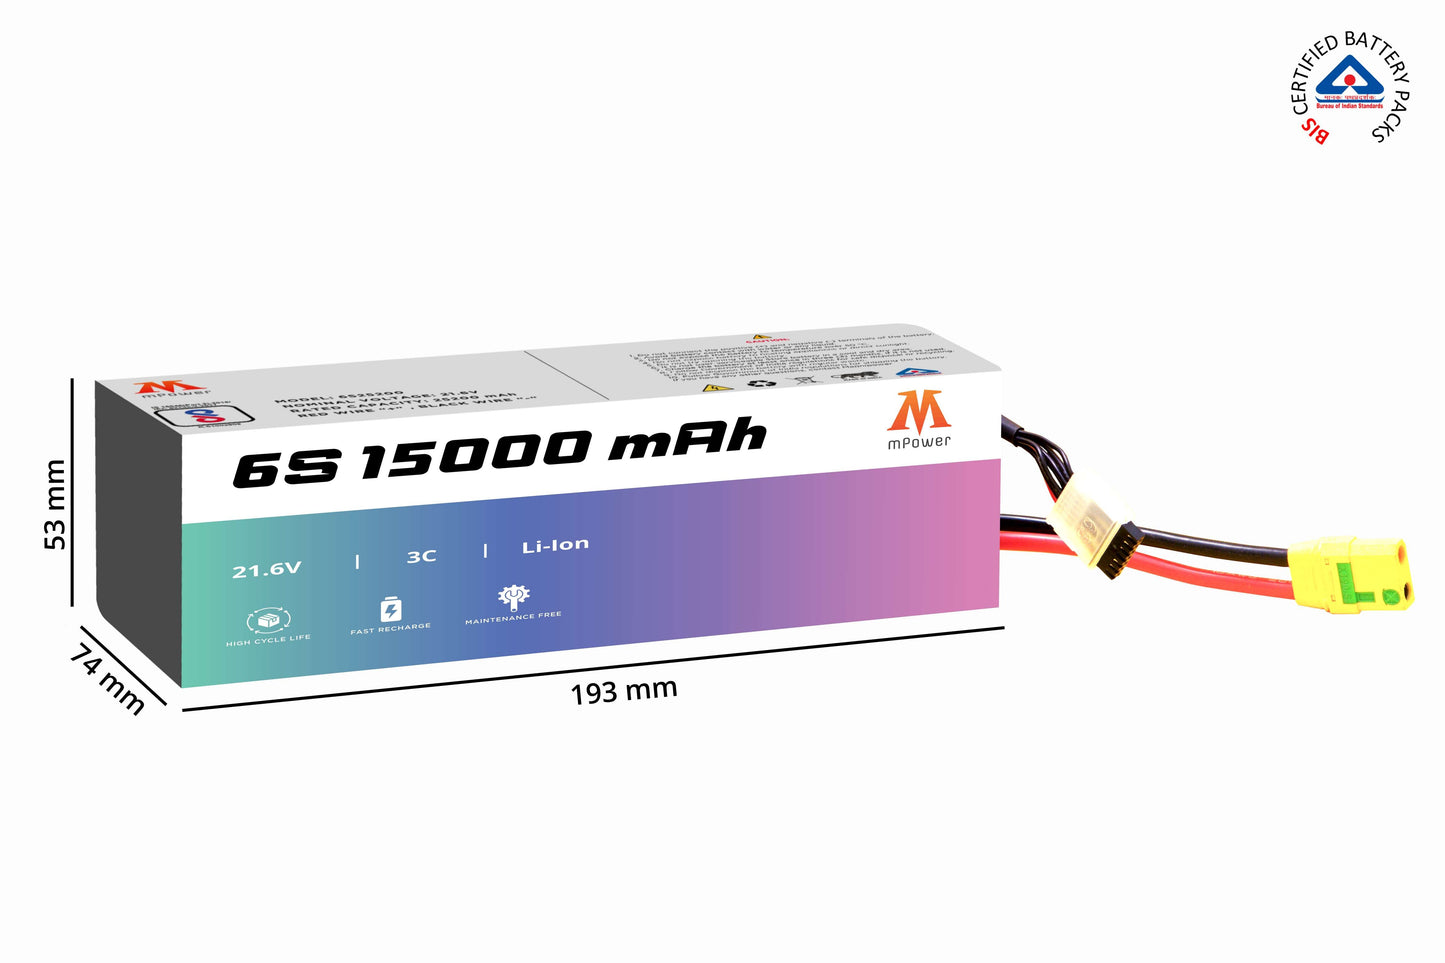 mPower 6S 15000mAh Lithium-Ion Battery for Surveillance Drones